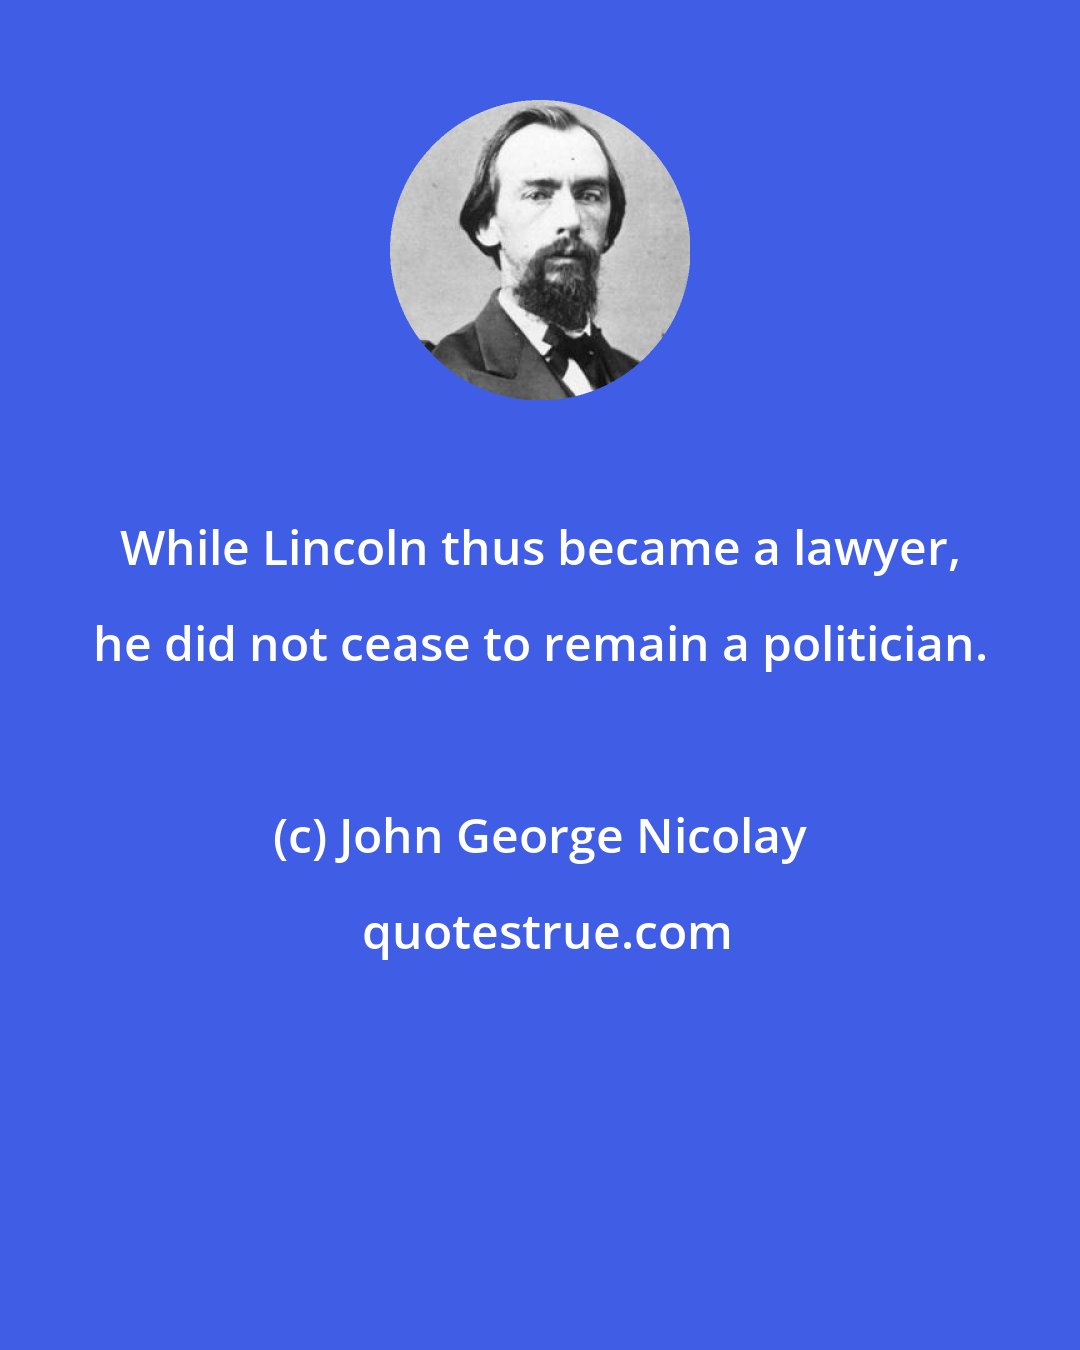 John George Nicolay: While Lincoln thus became a lawyer, he did not cease to remain a politician.